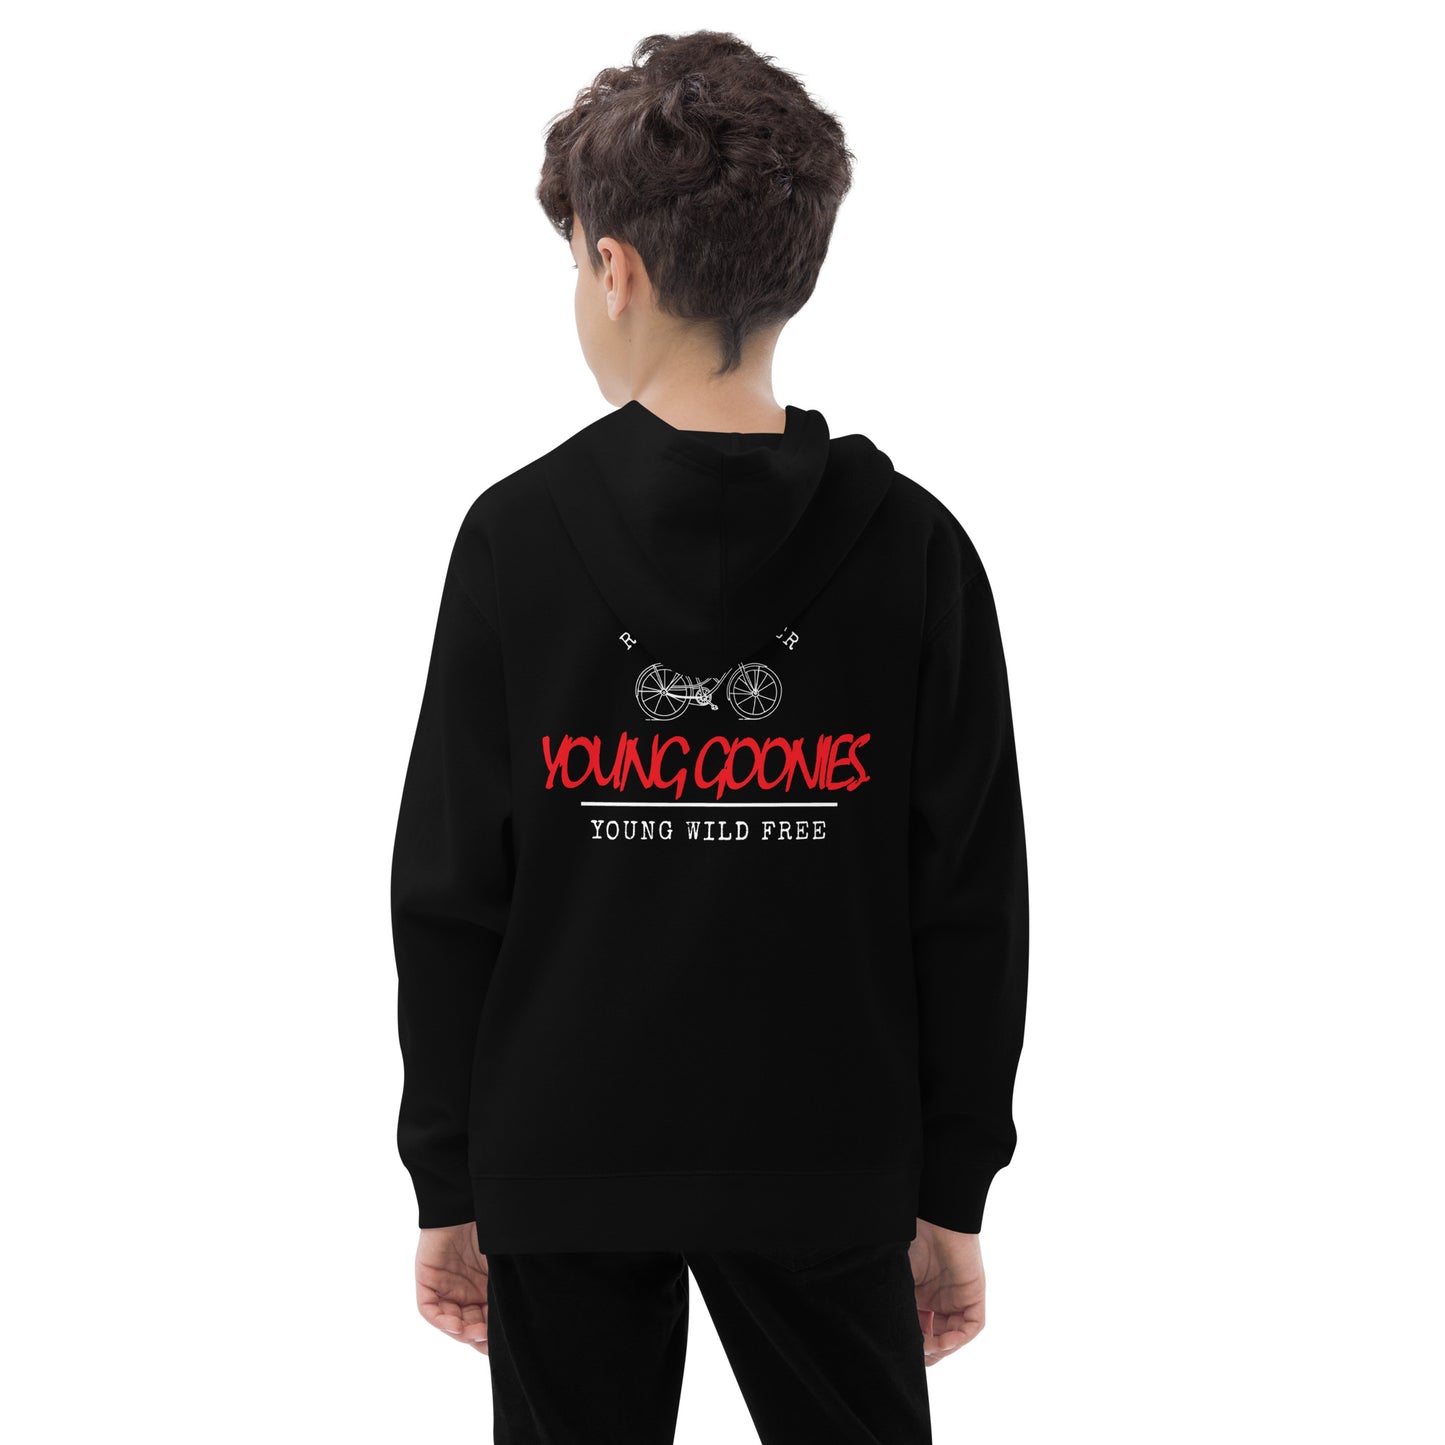 YOUNG GOONIES CRUISER YOUTH HOODIE